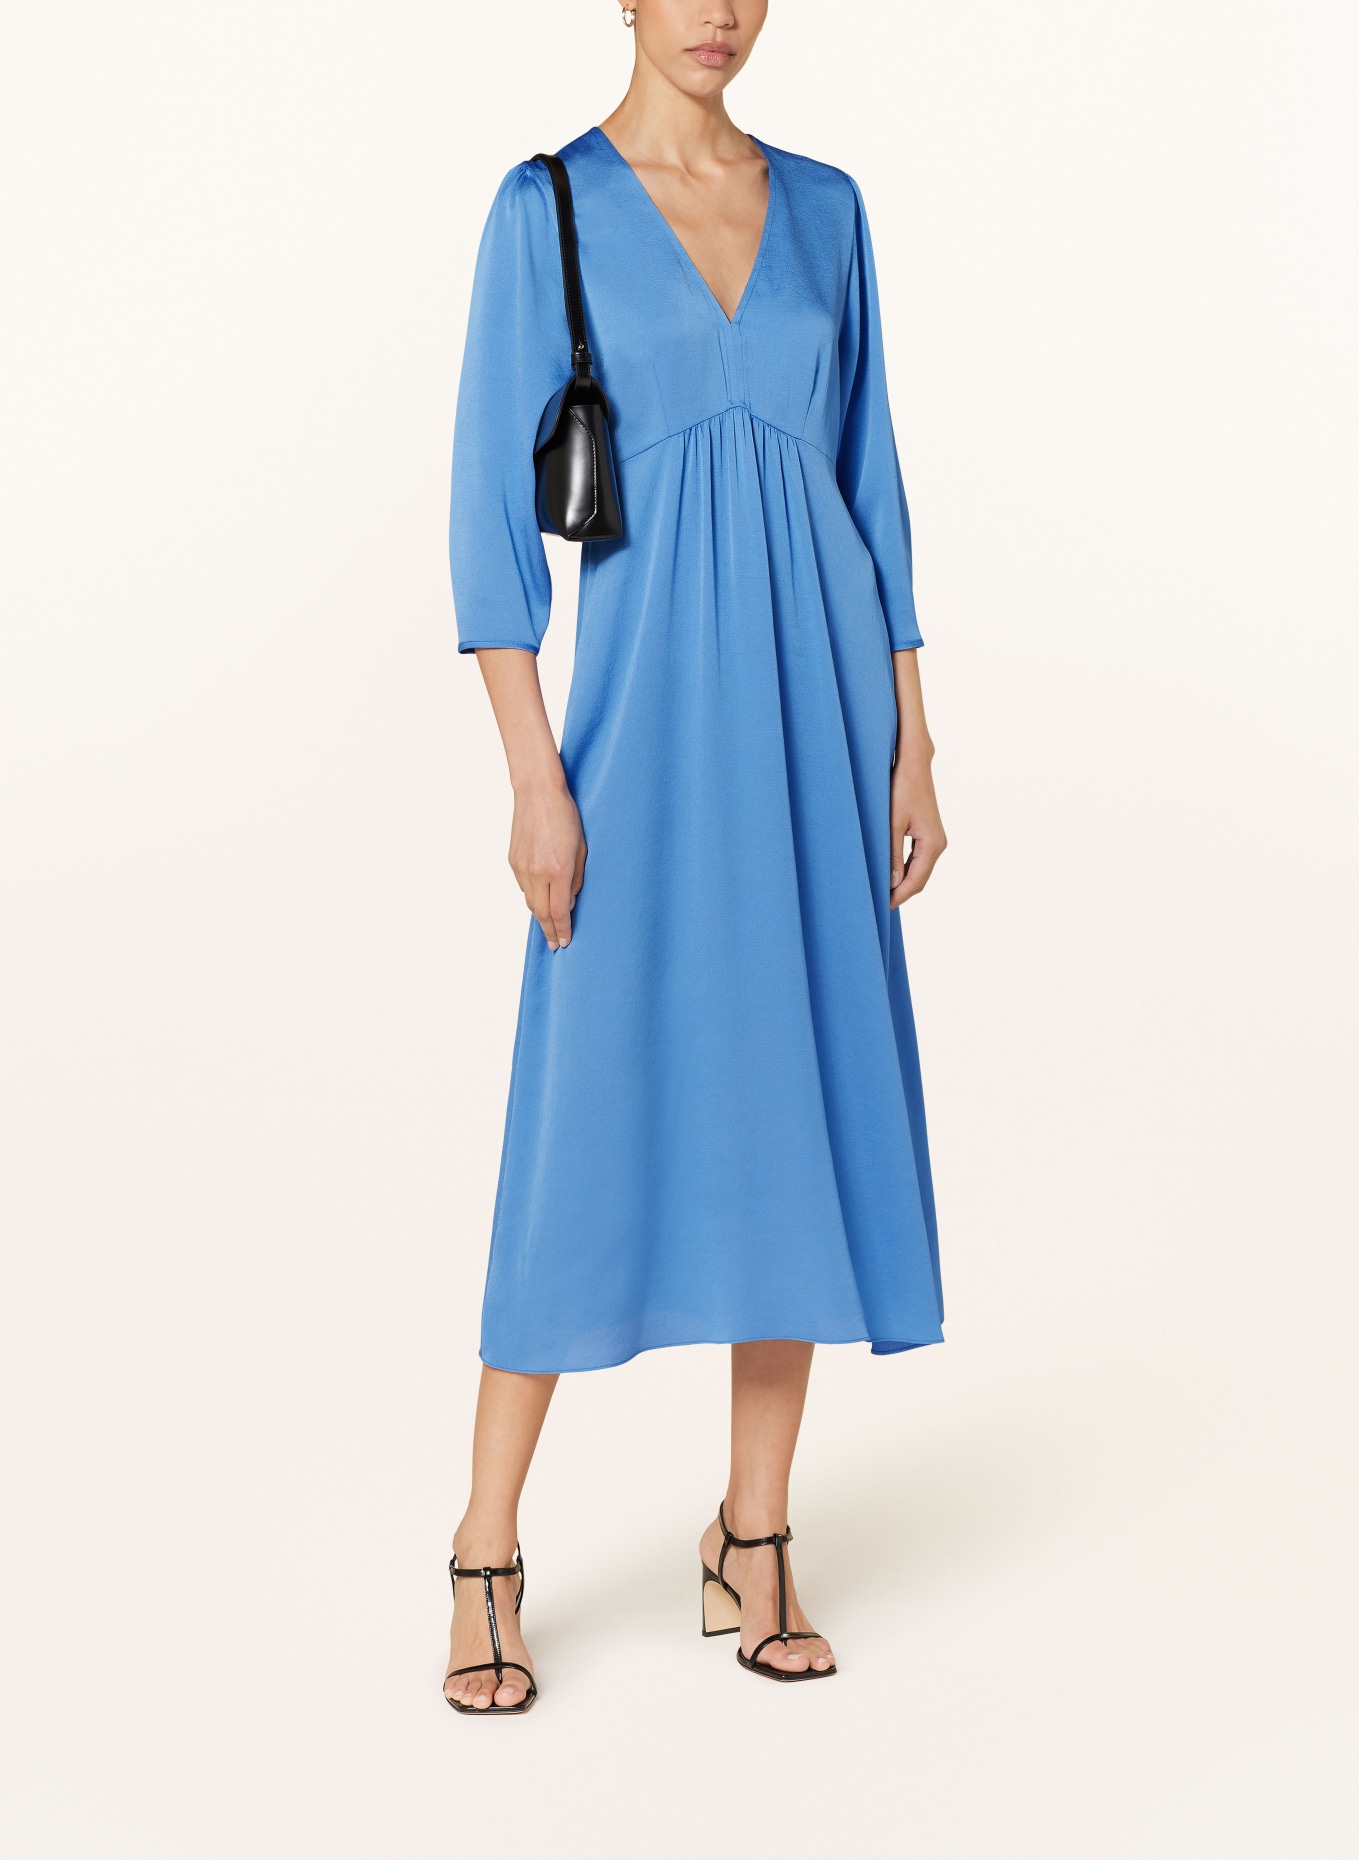 RIANI Satin dress with 3/4 sleeves, Color: LIGHT BLUE (Image 2)